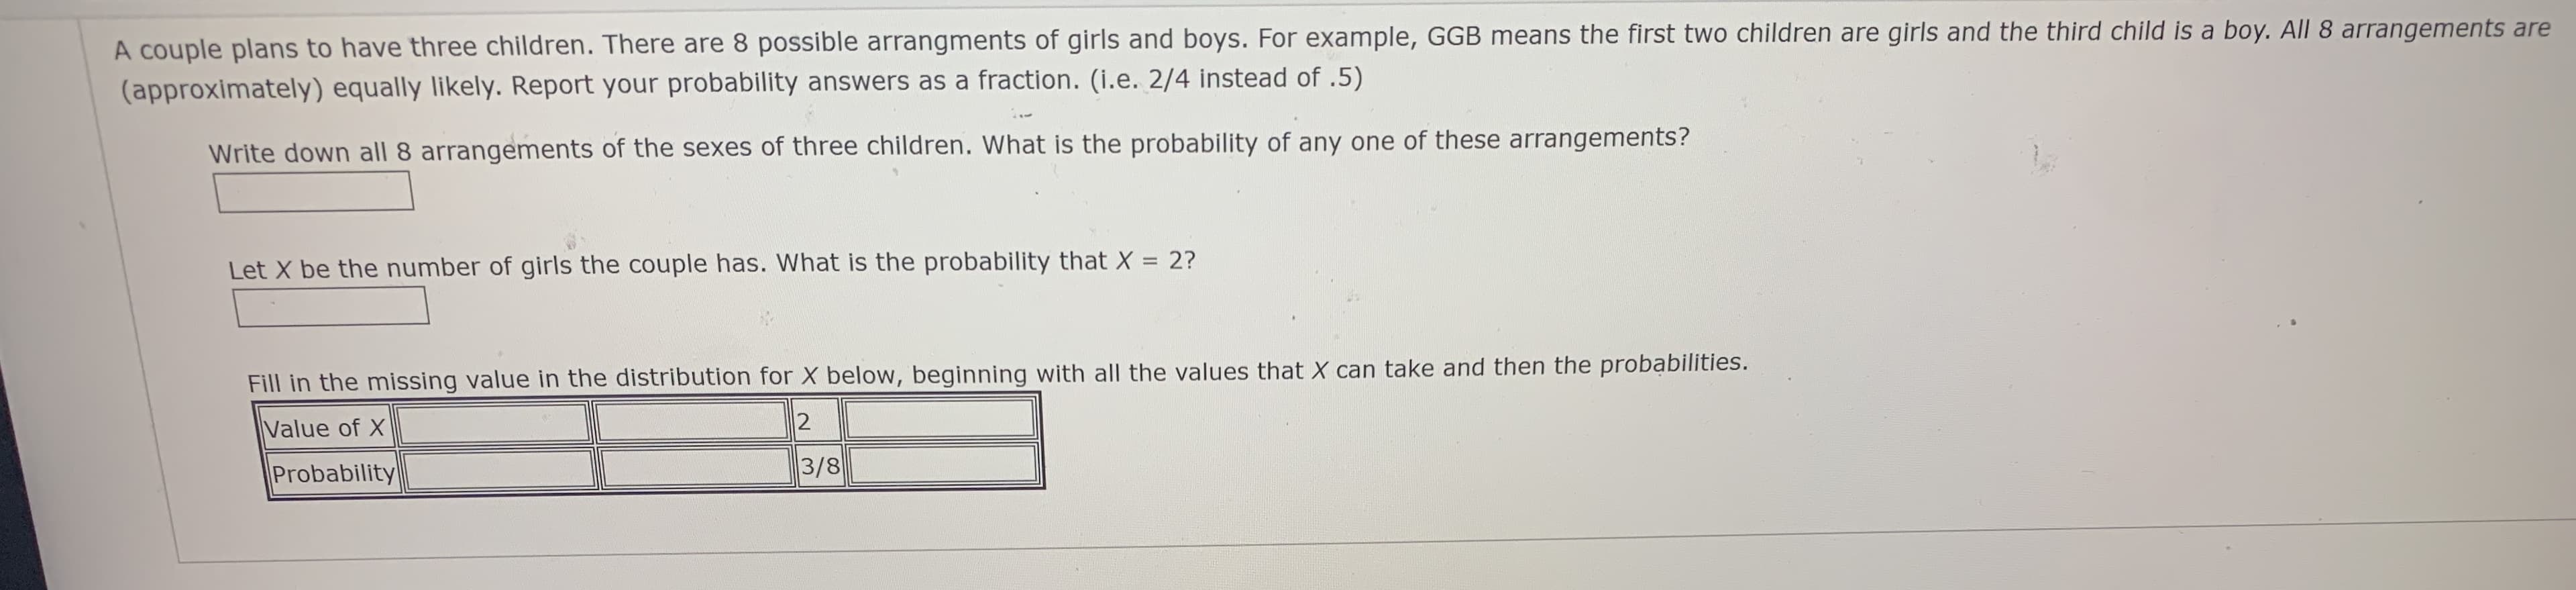 A couple plans to have three children. There are 8 possible arrangments of girls and boys. For example, GGB means the first two children are girls and the third child is a boy. All 8 arrangements are
(approximately) equally likely. Report your probability answers as a fraction. (i.e. 2/4 instead of .5)
Write down all 8 arrangements of the sexes of three children. What is the probability of any one of these arrangements?
Let X be the number of girls the couple has. What is the probability that X = 2?
%3D
Fill in the missing value in the distribution for X below, beginning with all the values that X can take and then the probabilities.
Value of X
Probability
3/8
